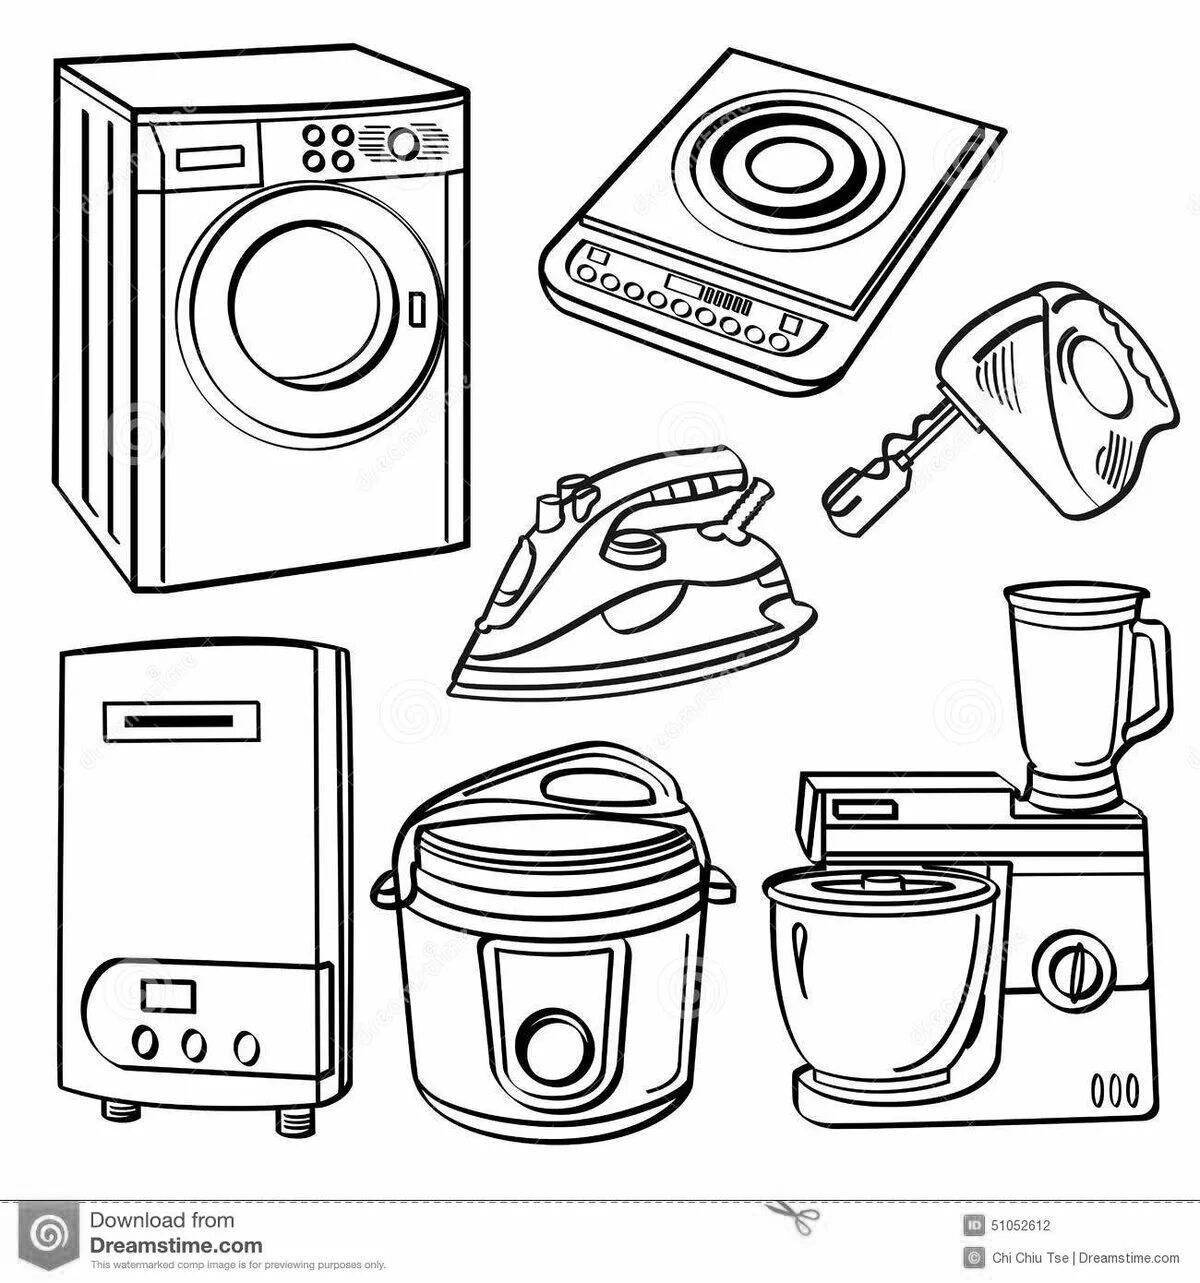 Colorful and intriguing coloring book household appliances for preschoolers